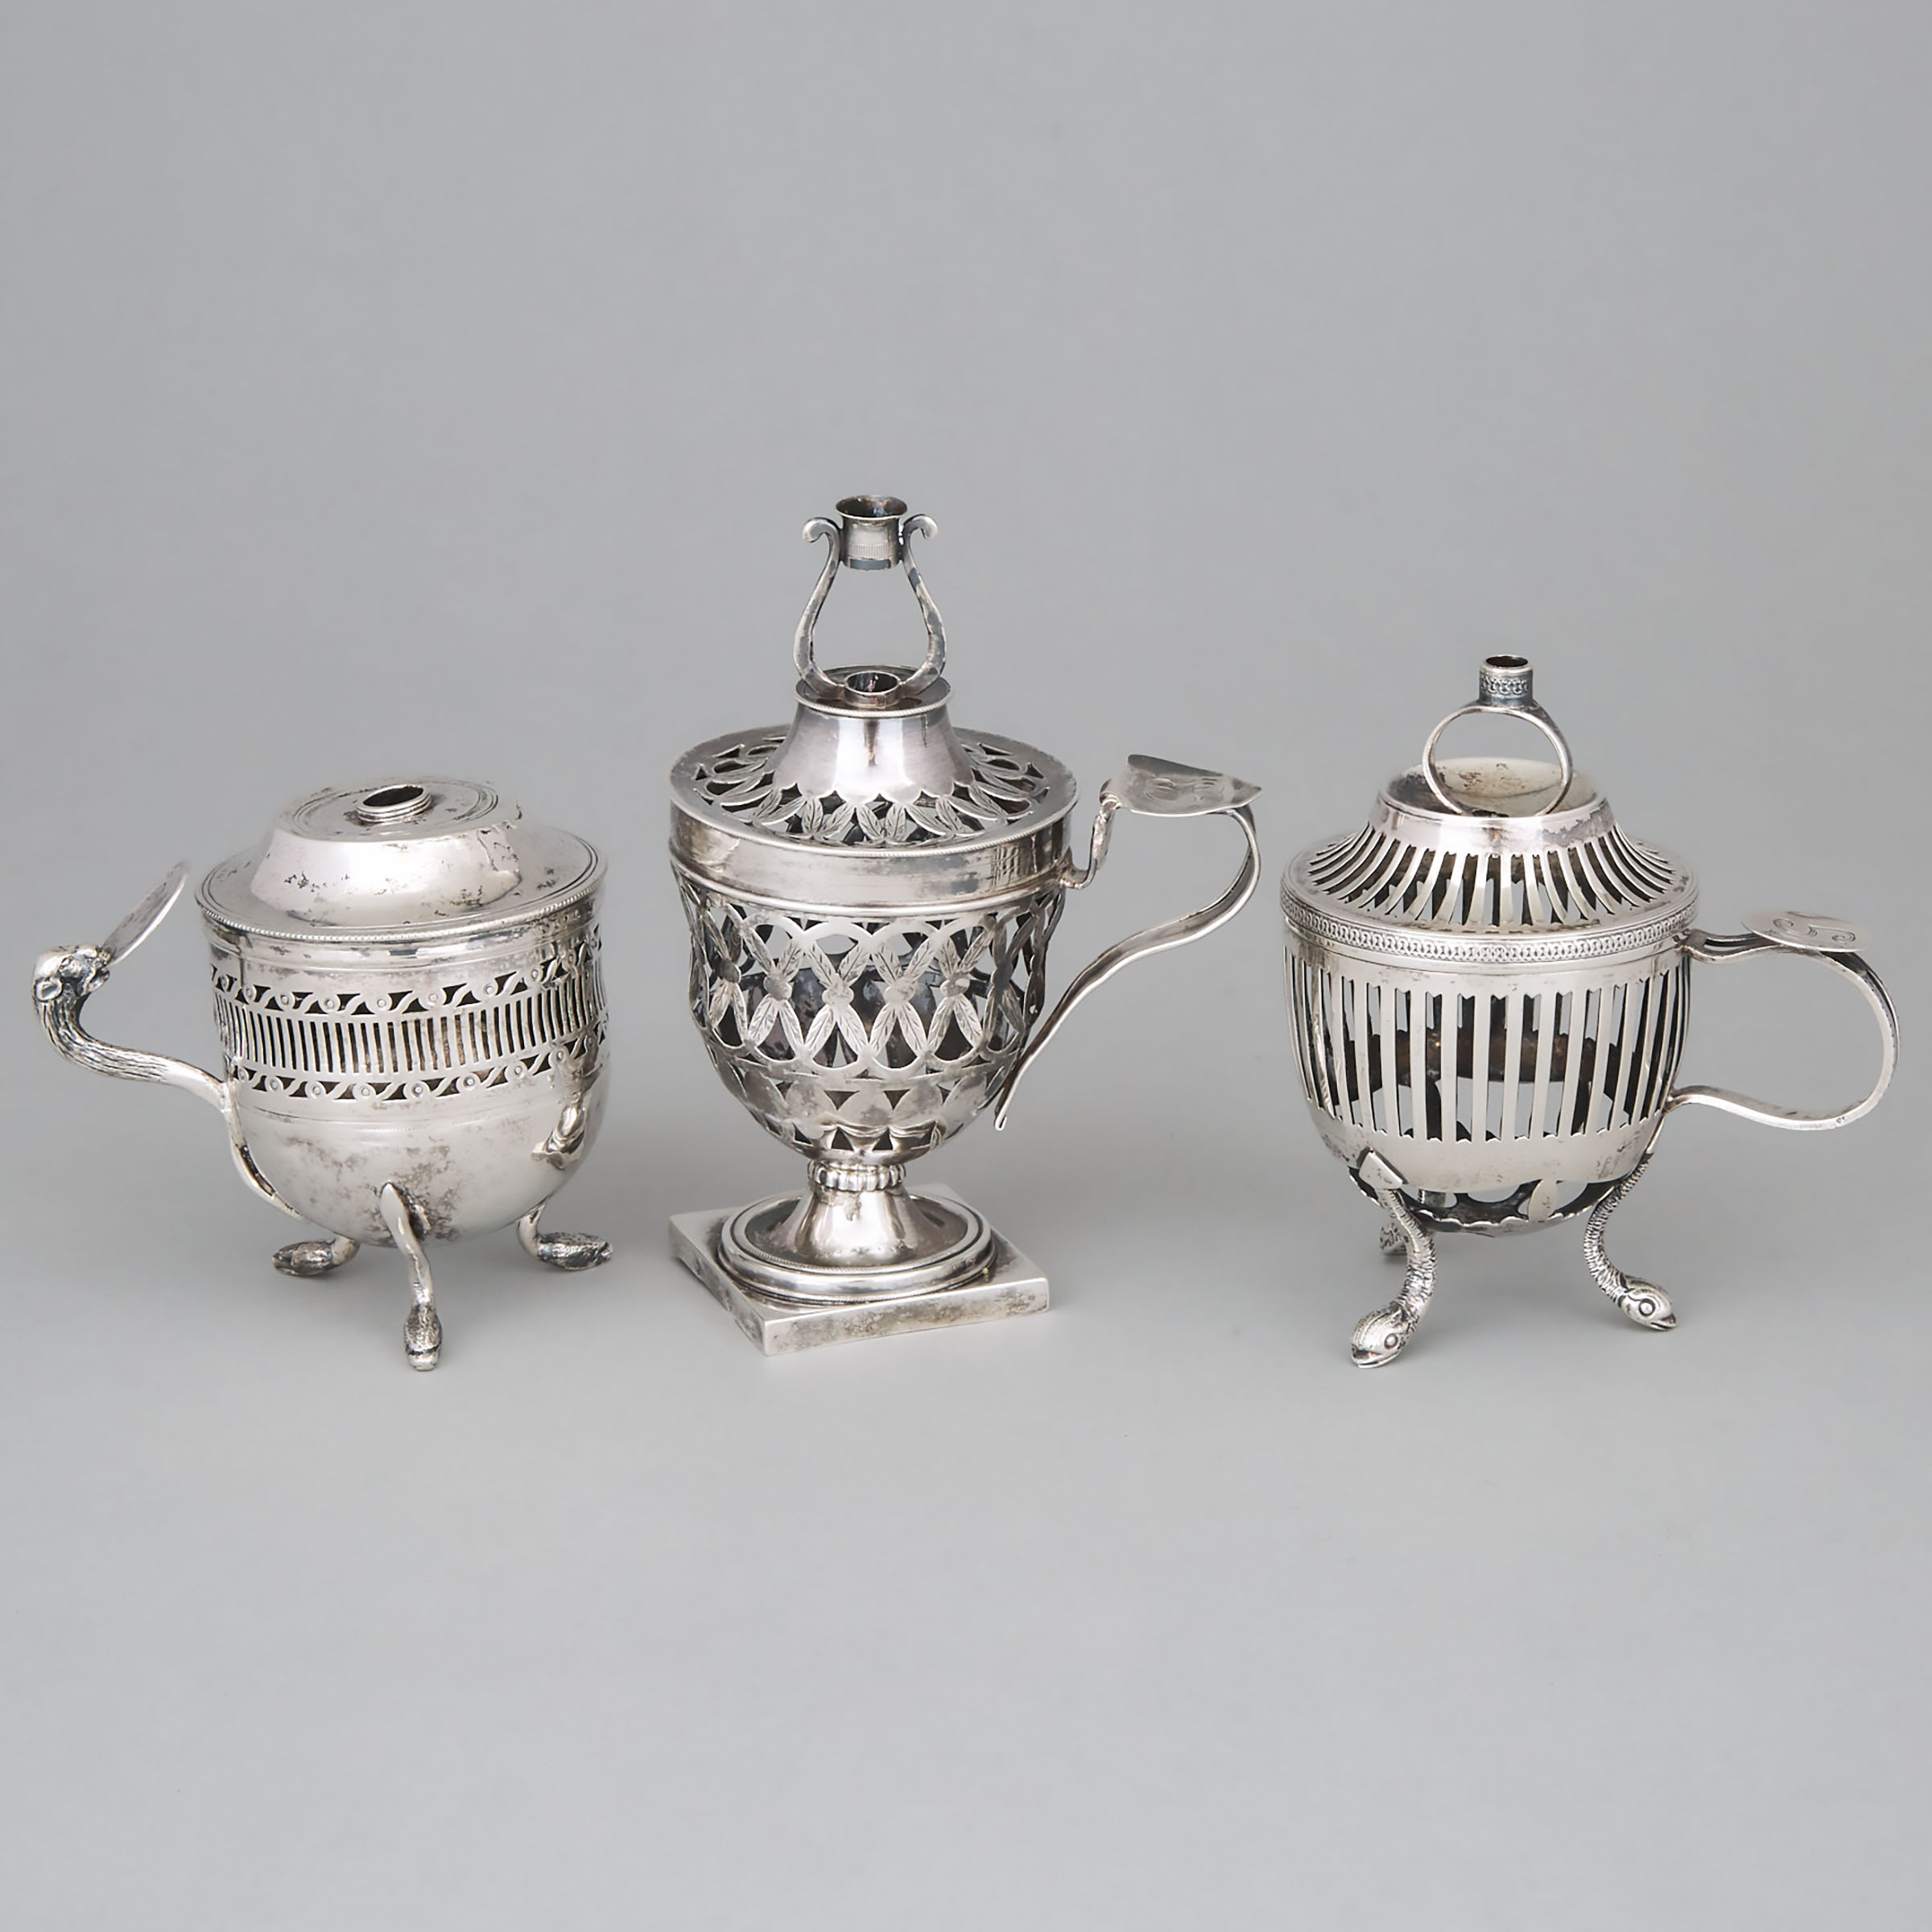 Three Italian Silver Pierced Bougie Boxes, G. Petochi and others, 19th/20th century